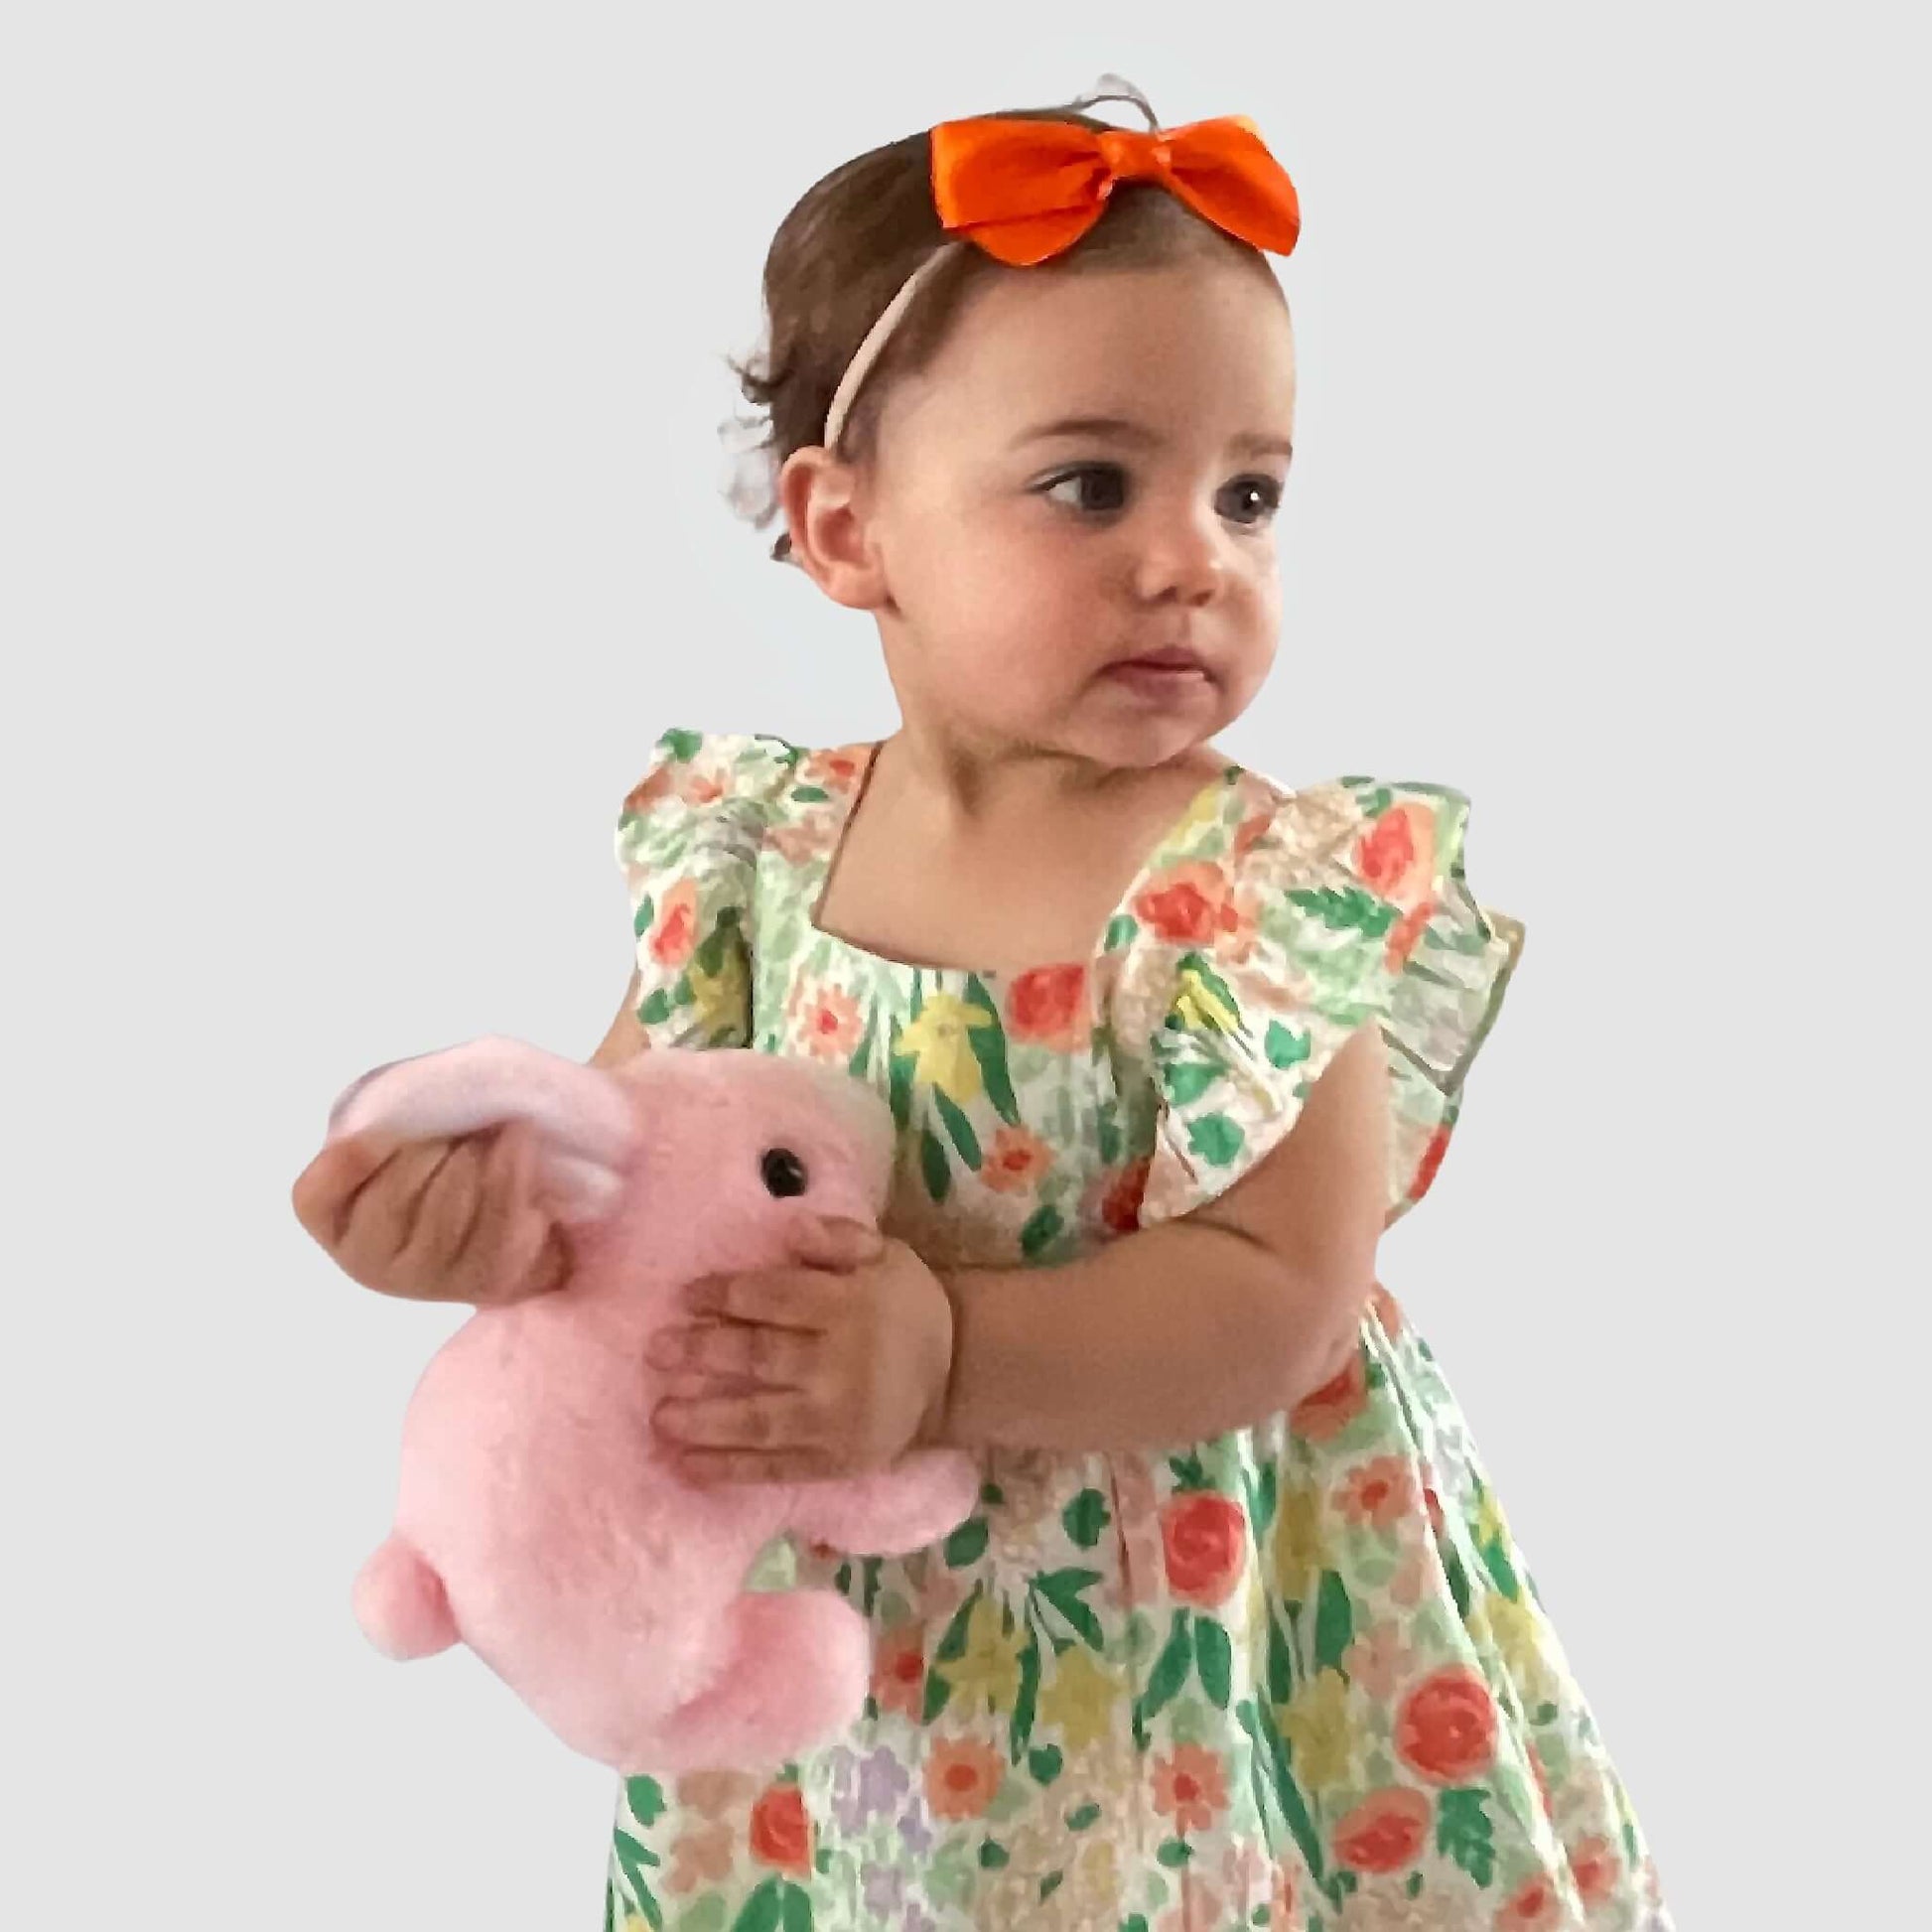 Toddler girl in floral dress with orange grosgrain bow headband holding a pink stuffed bunny